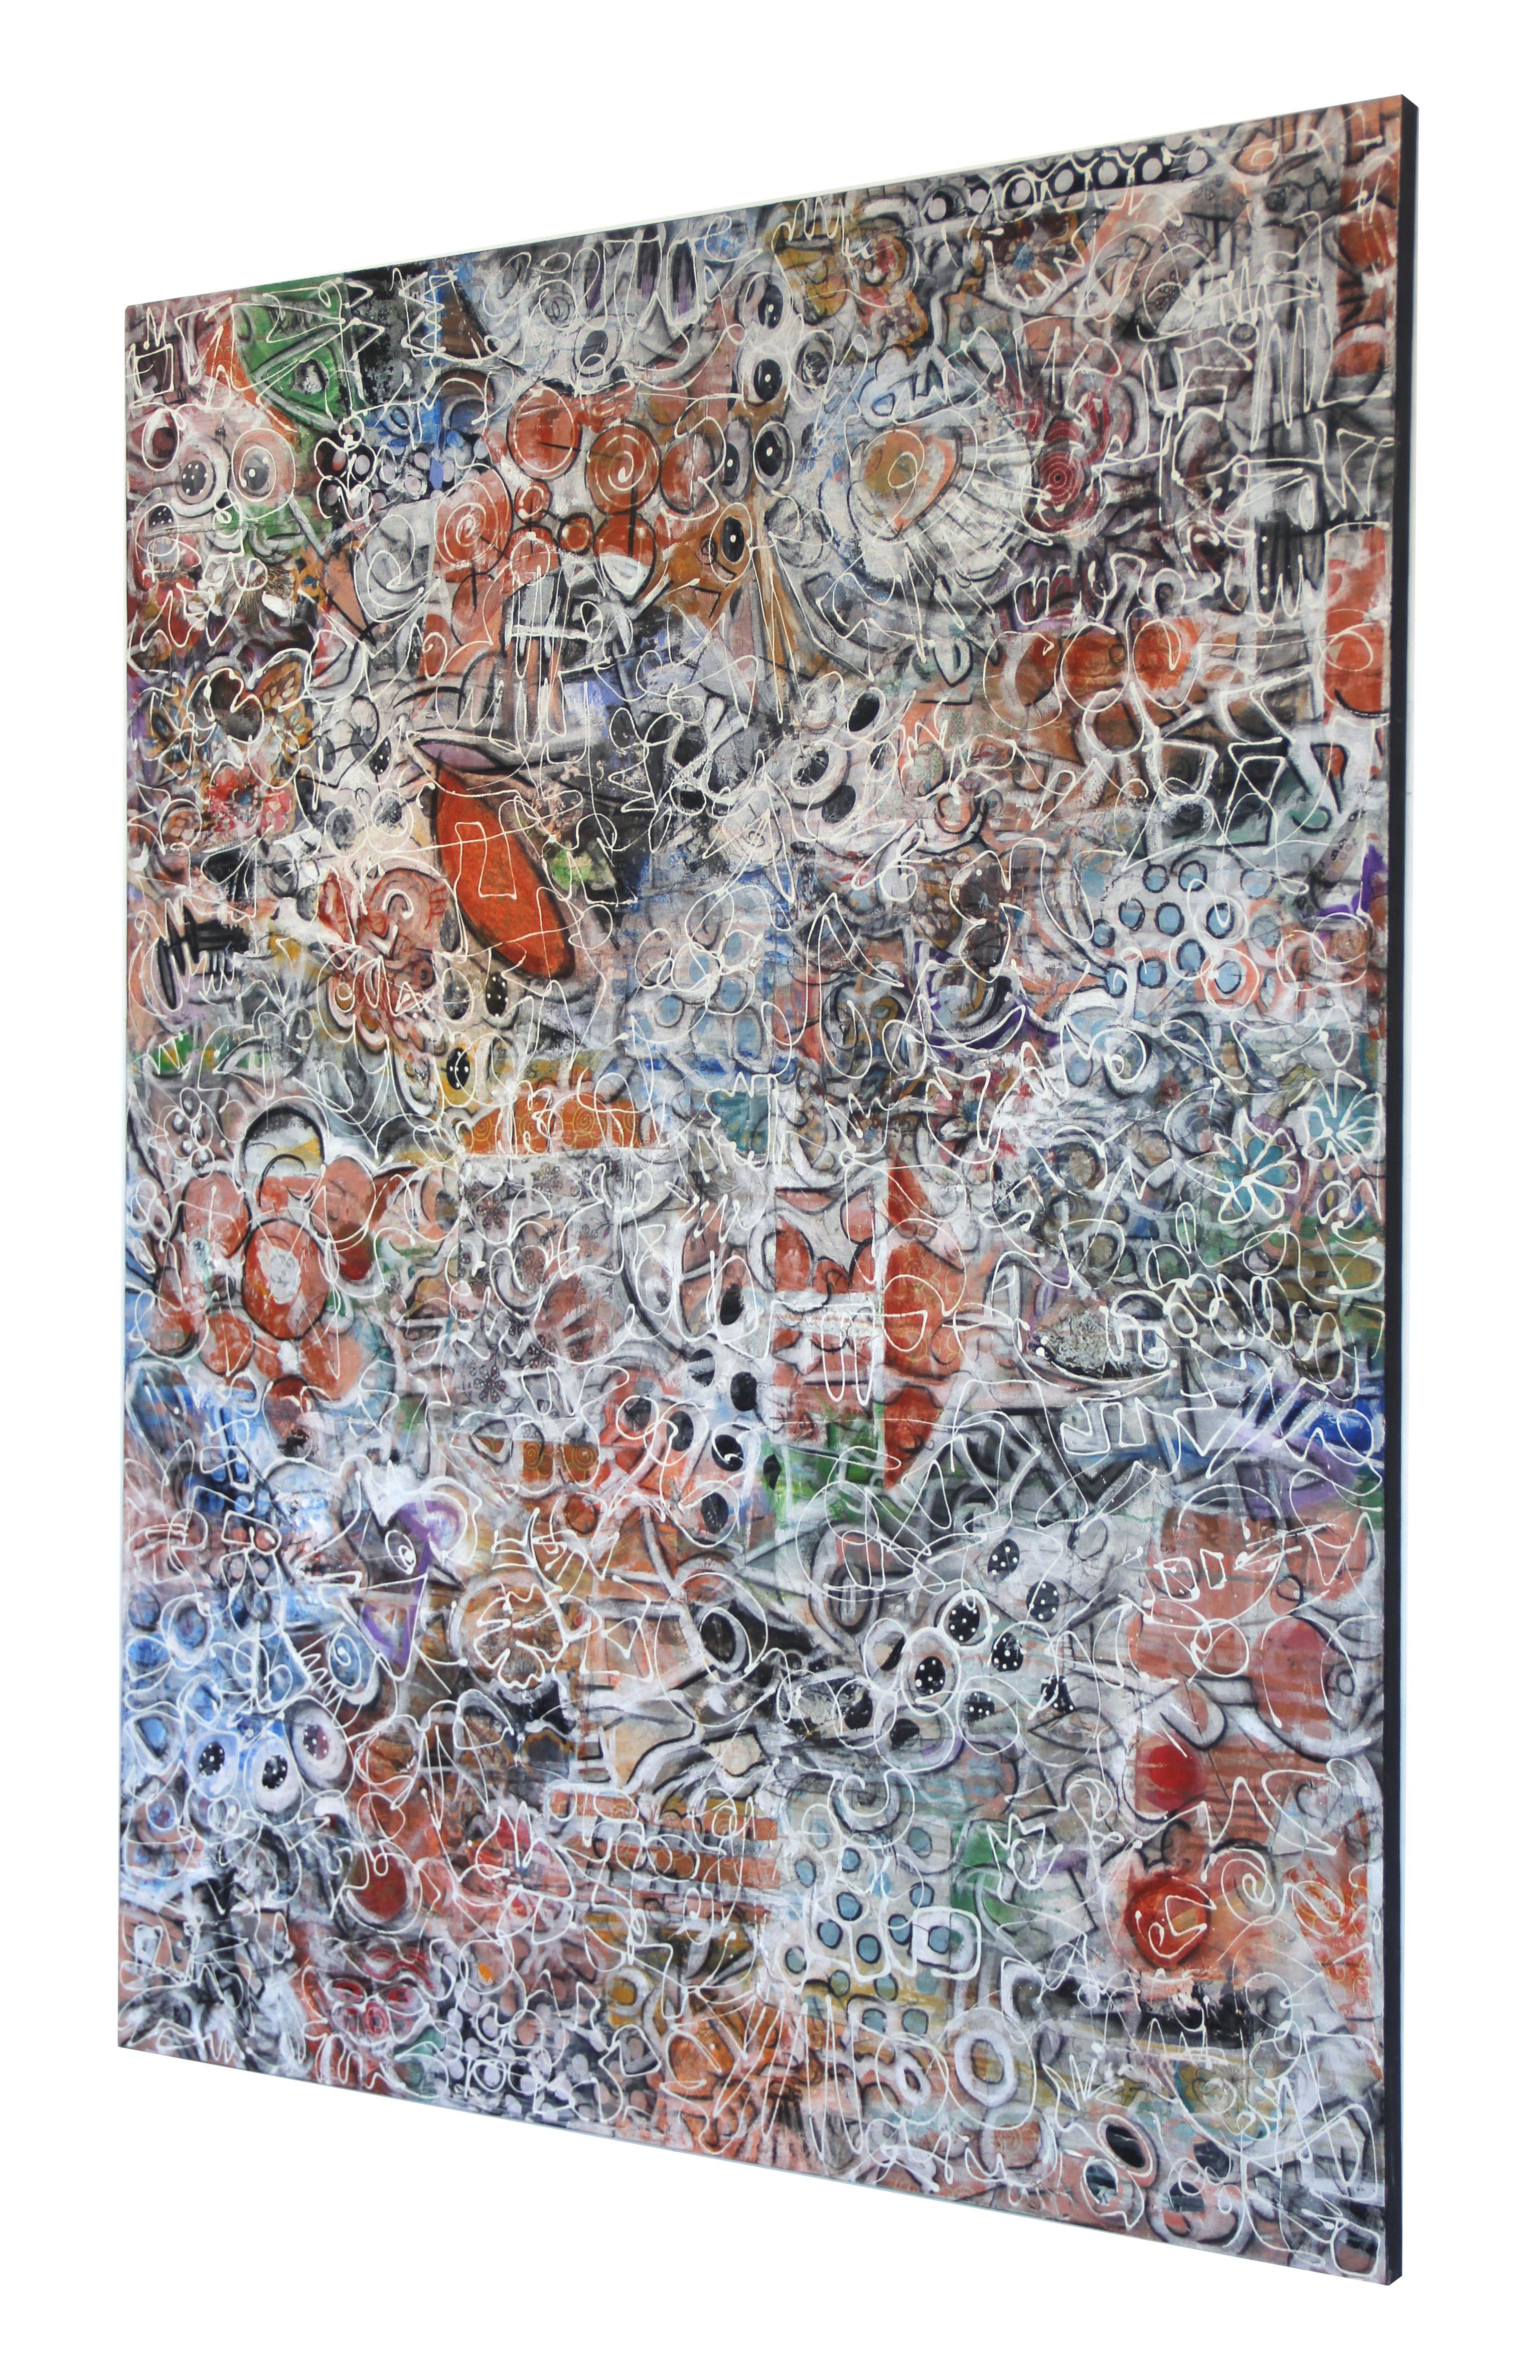 Bruce Rubenstein specializes in large-scale artworks, using huge canvases to tell his stories. This one-of-a-kind oversized 84 inch tall by 68 inch wide original artwork is a mixed media composition layered with acrylic paint and charcoal on canvas.